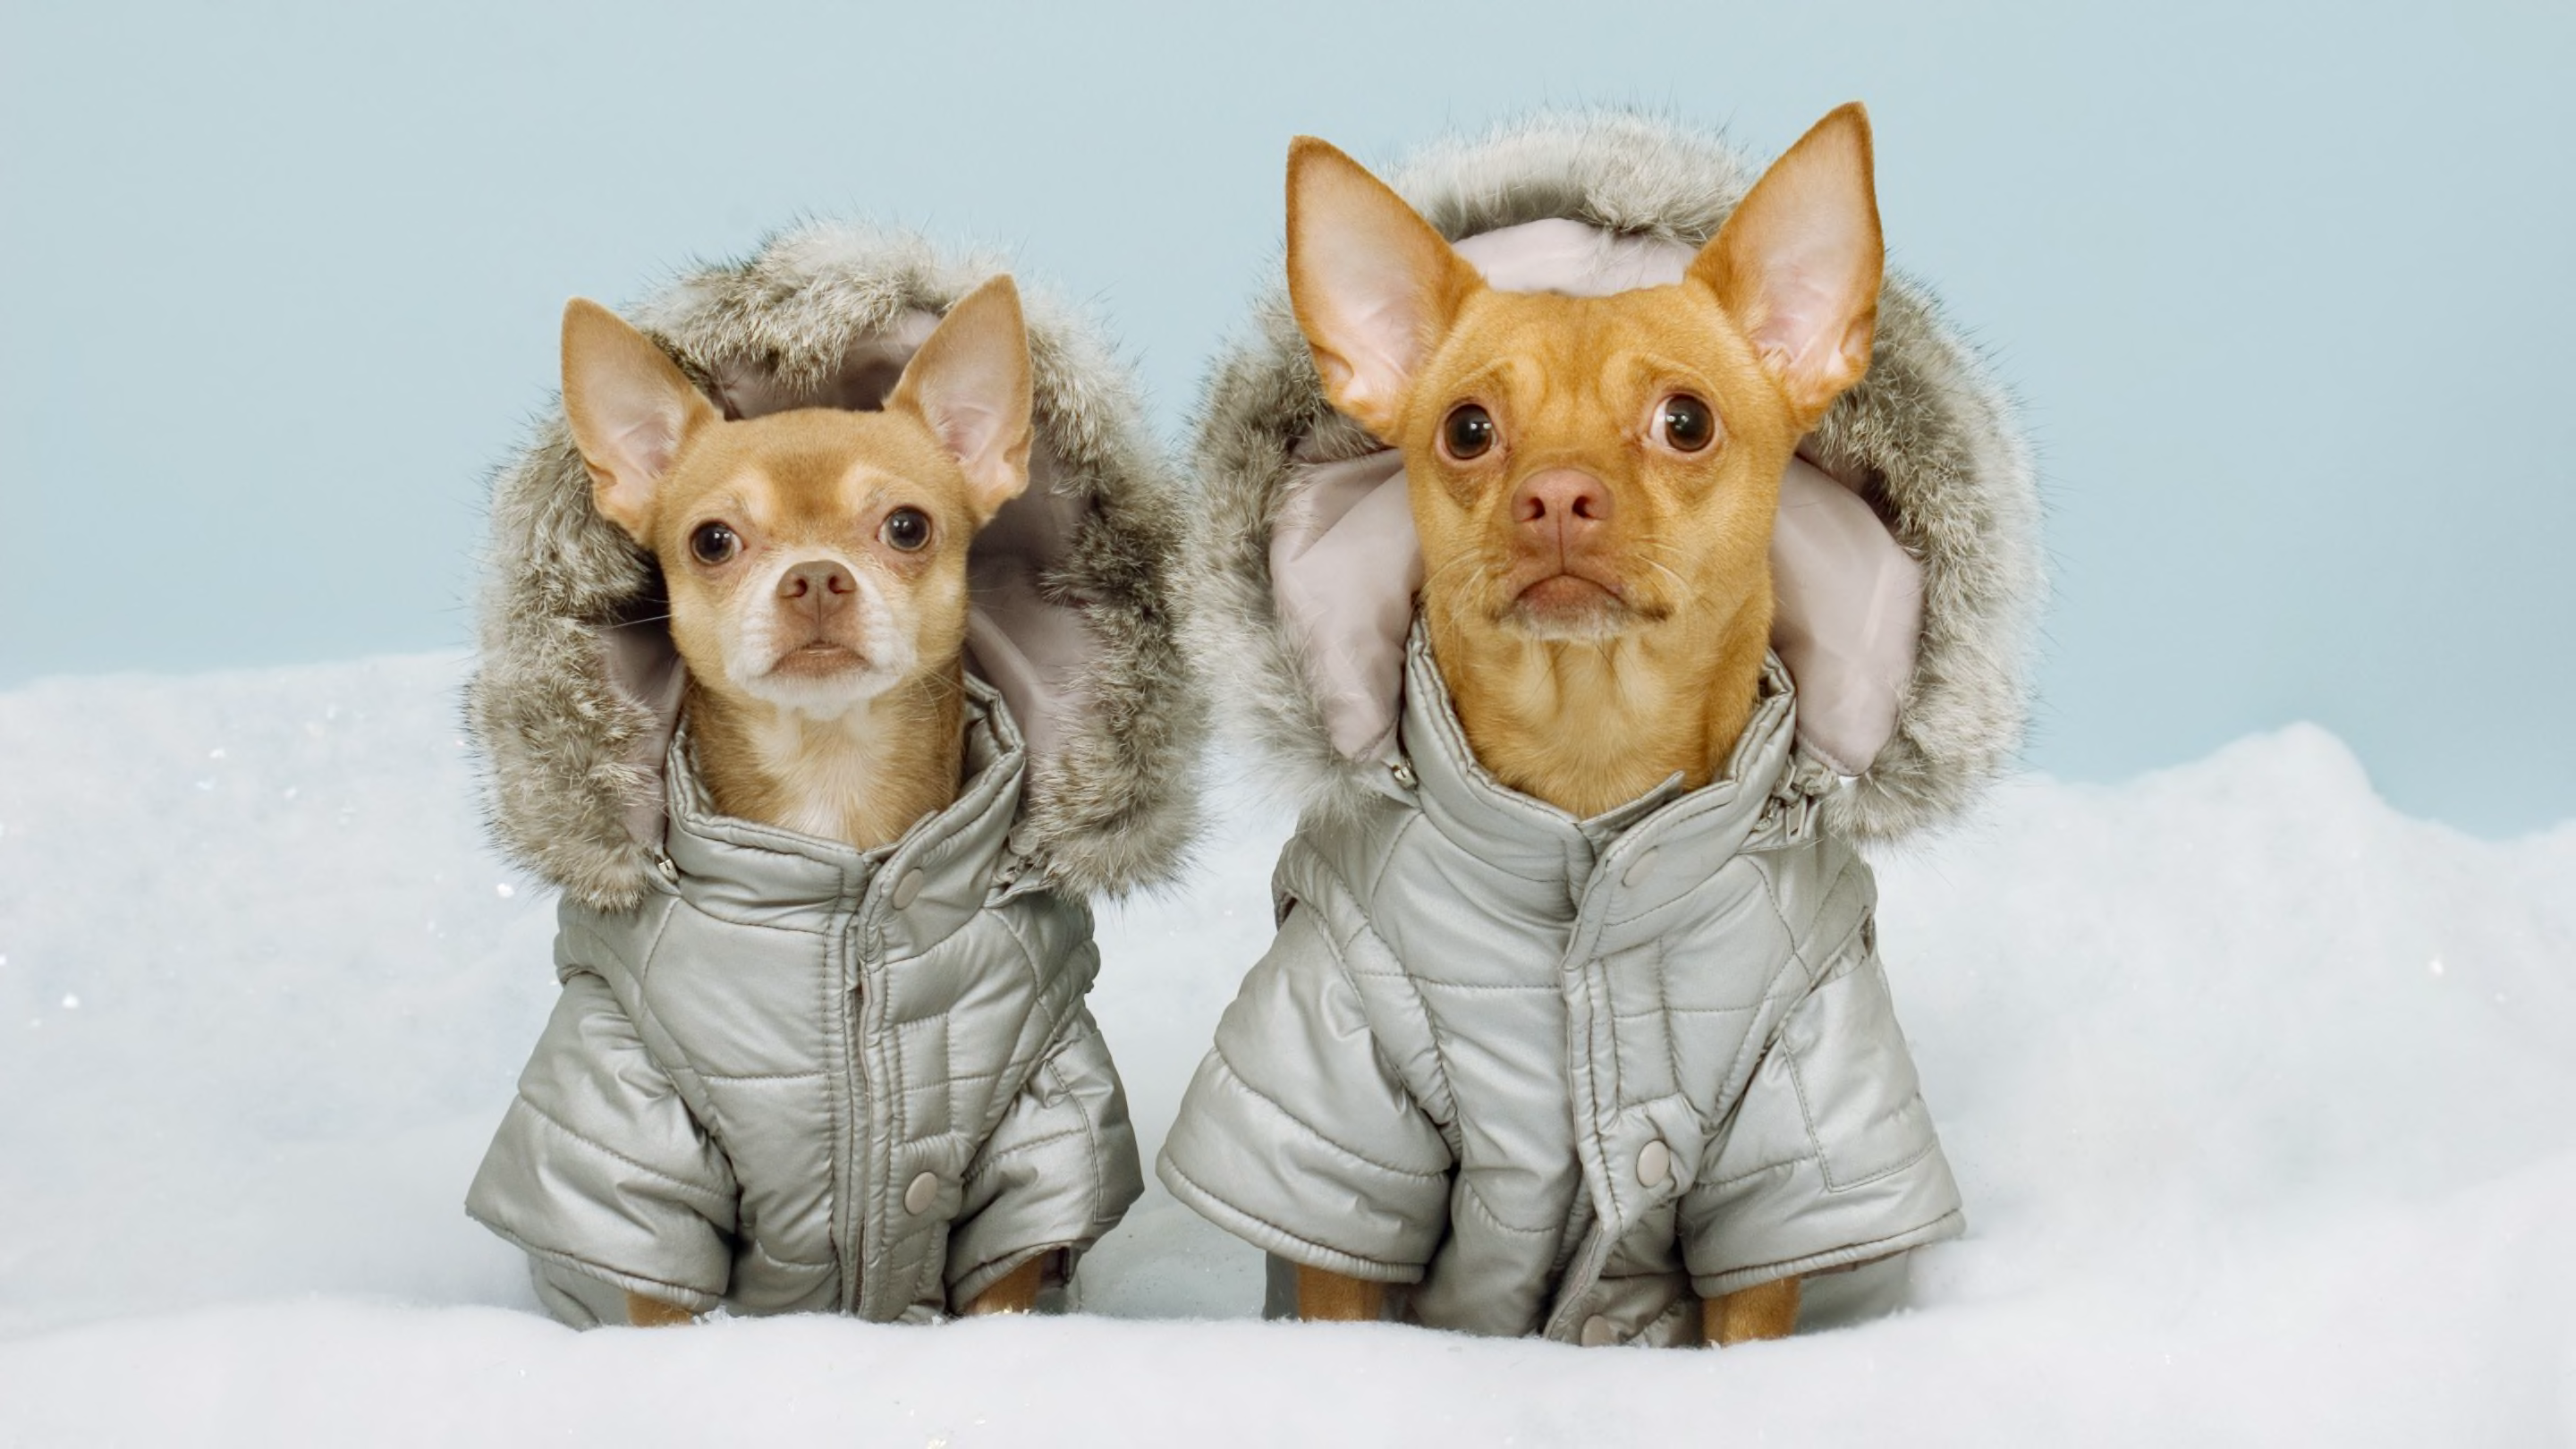 Handy Chart Tells You When It’s Too Cold to Walk Your Dog